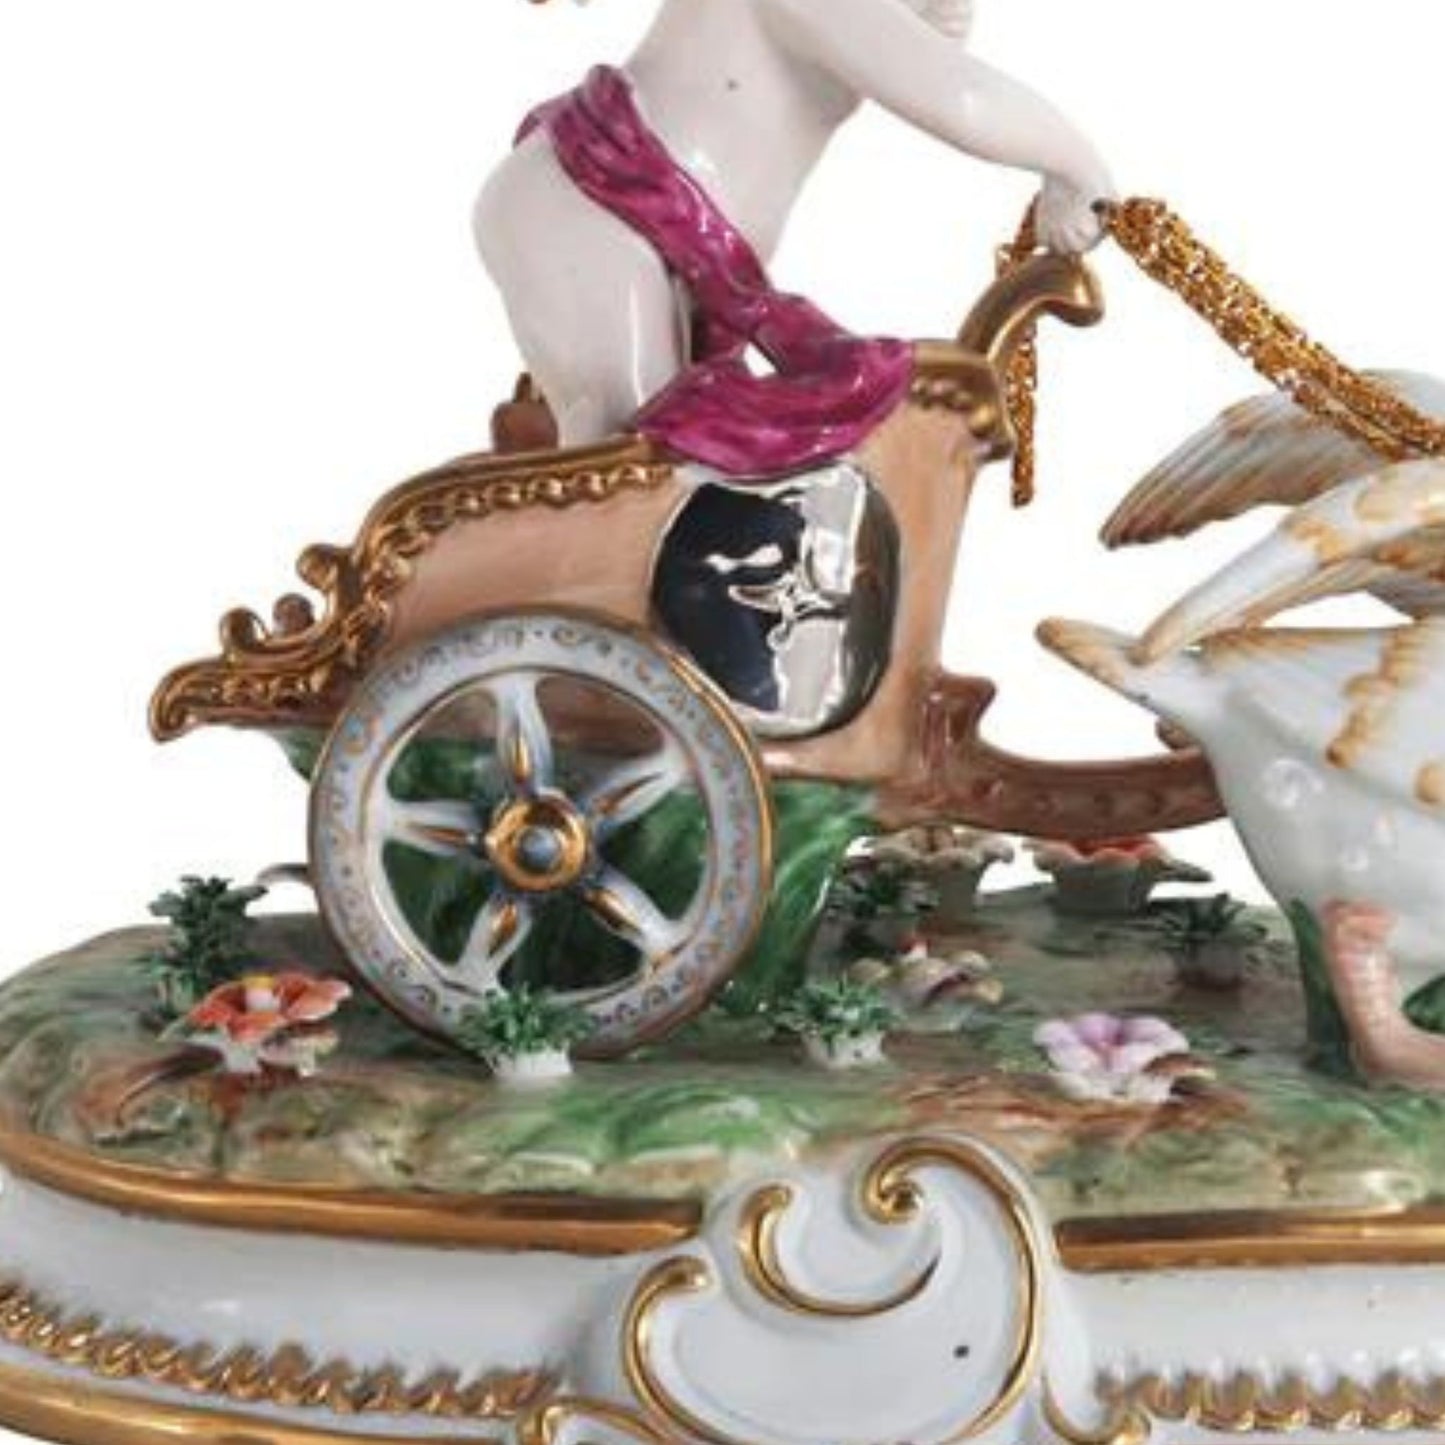 Goose Carriage with Cherubs